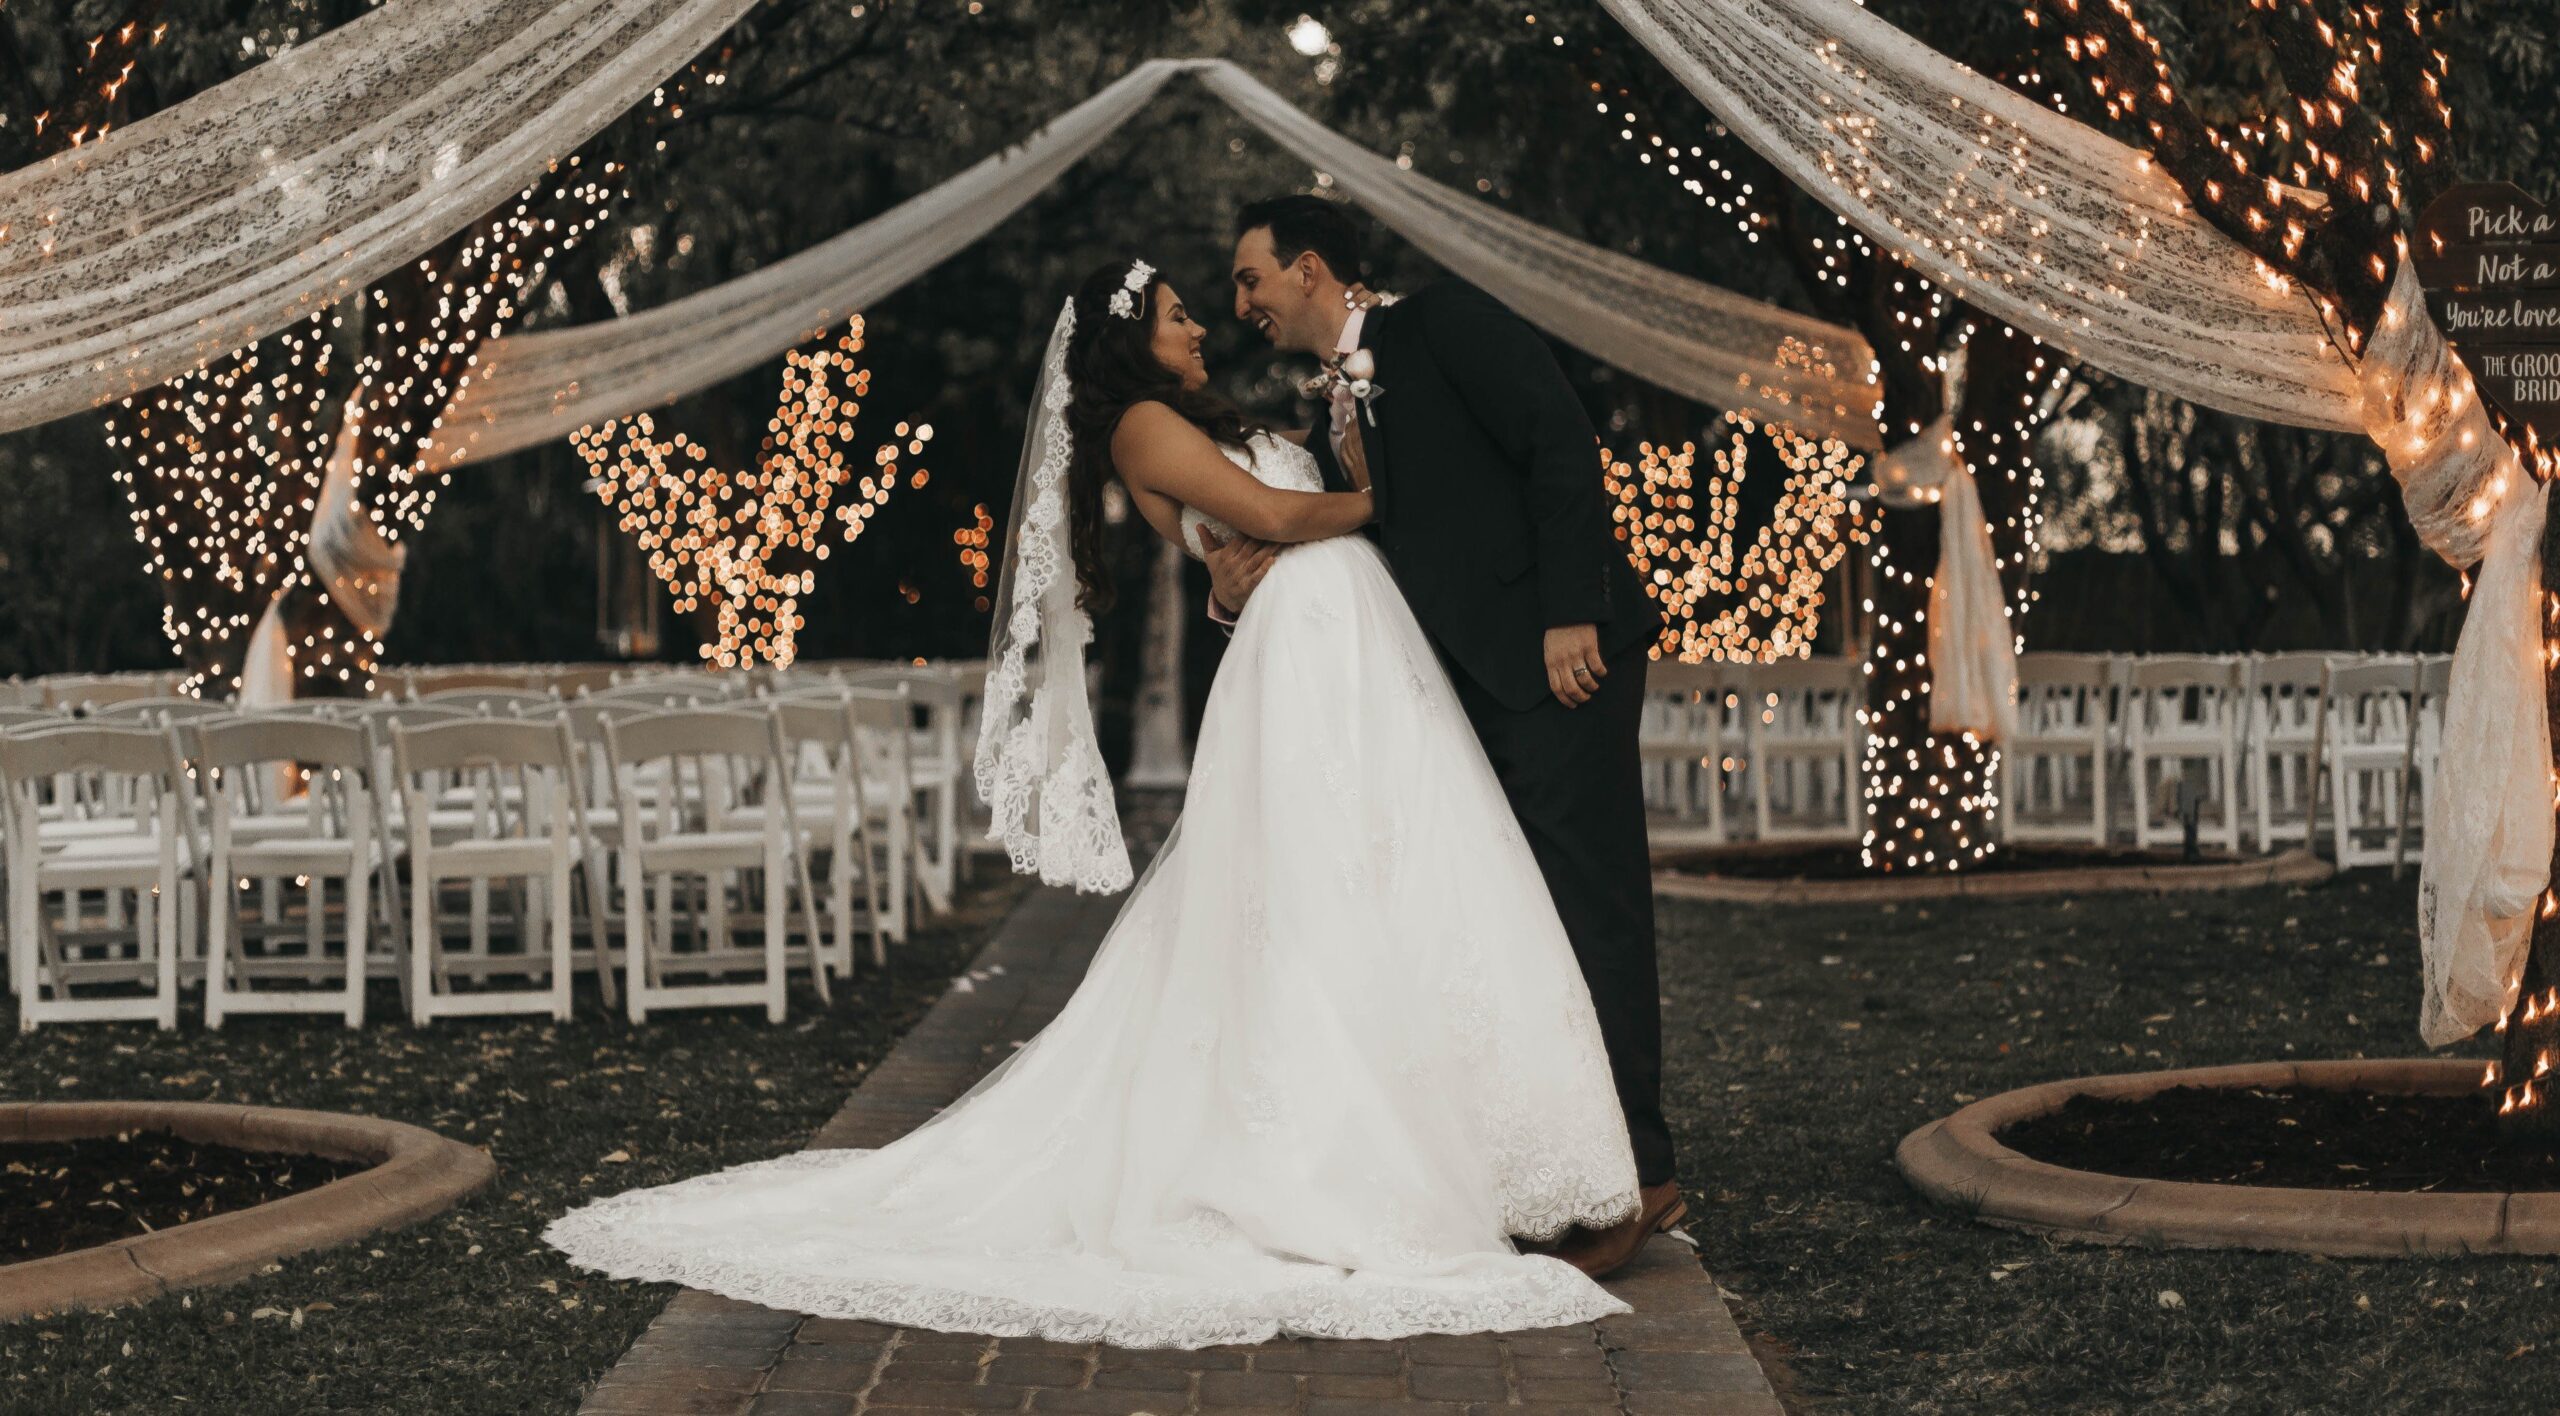 7 Quinceanera Essentials That a Worthy Banquet Venue Should Help You With